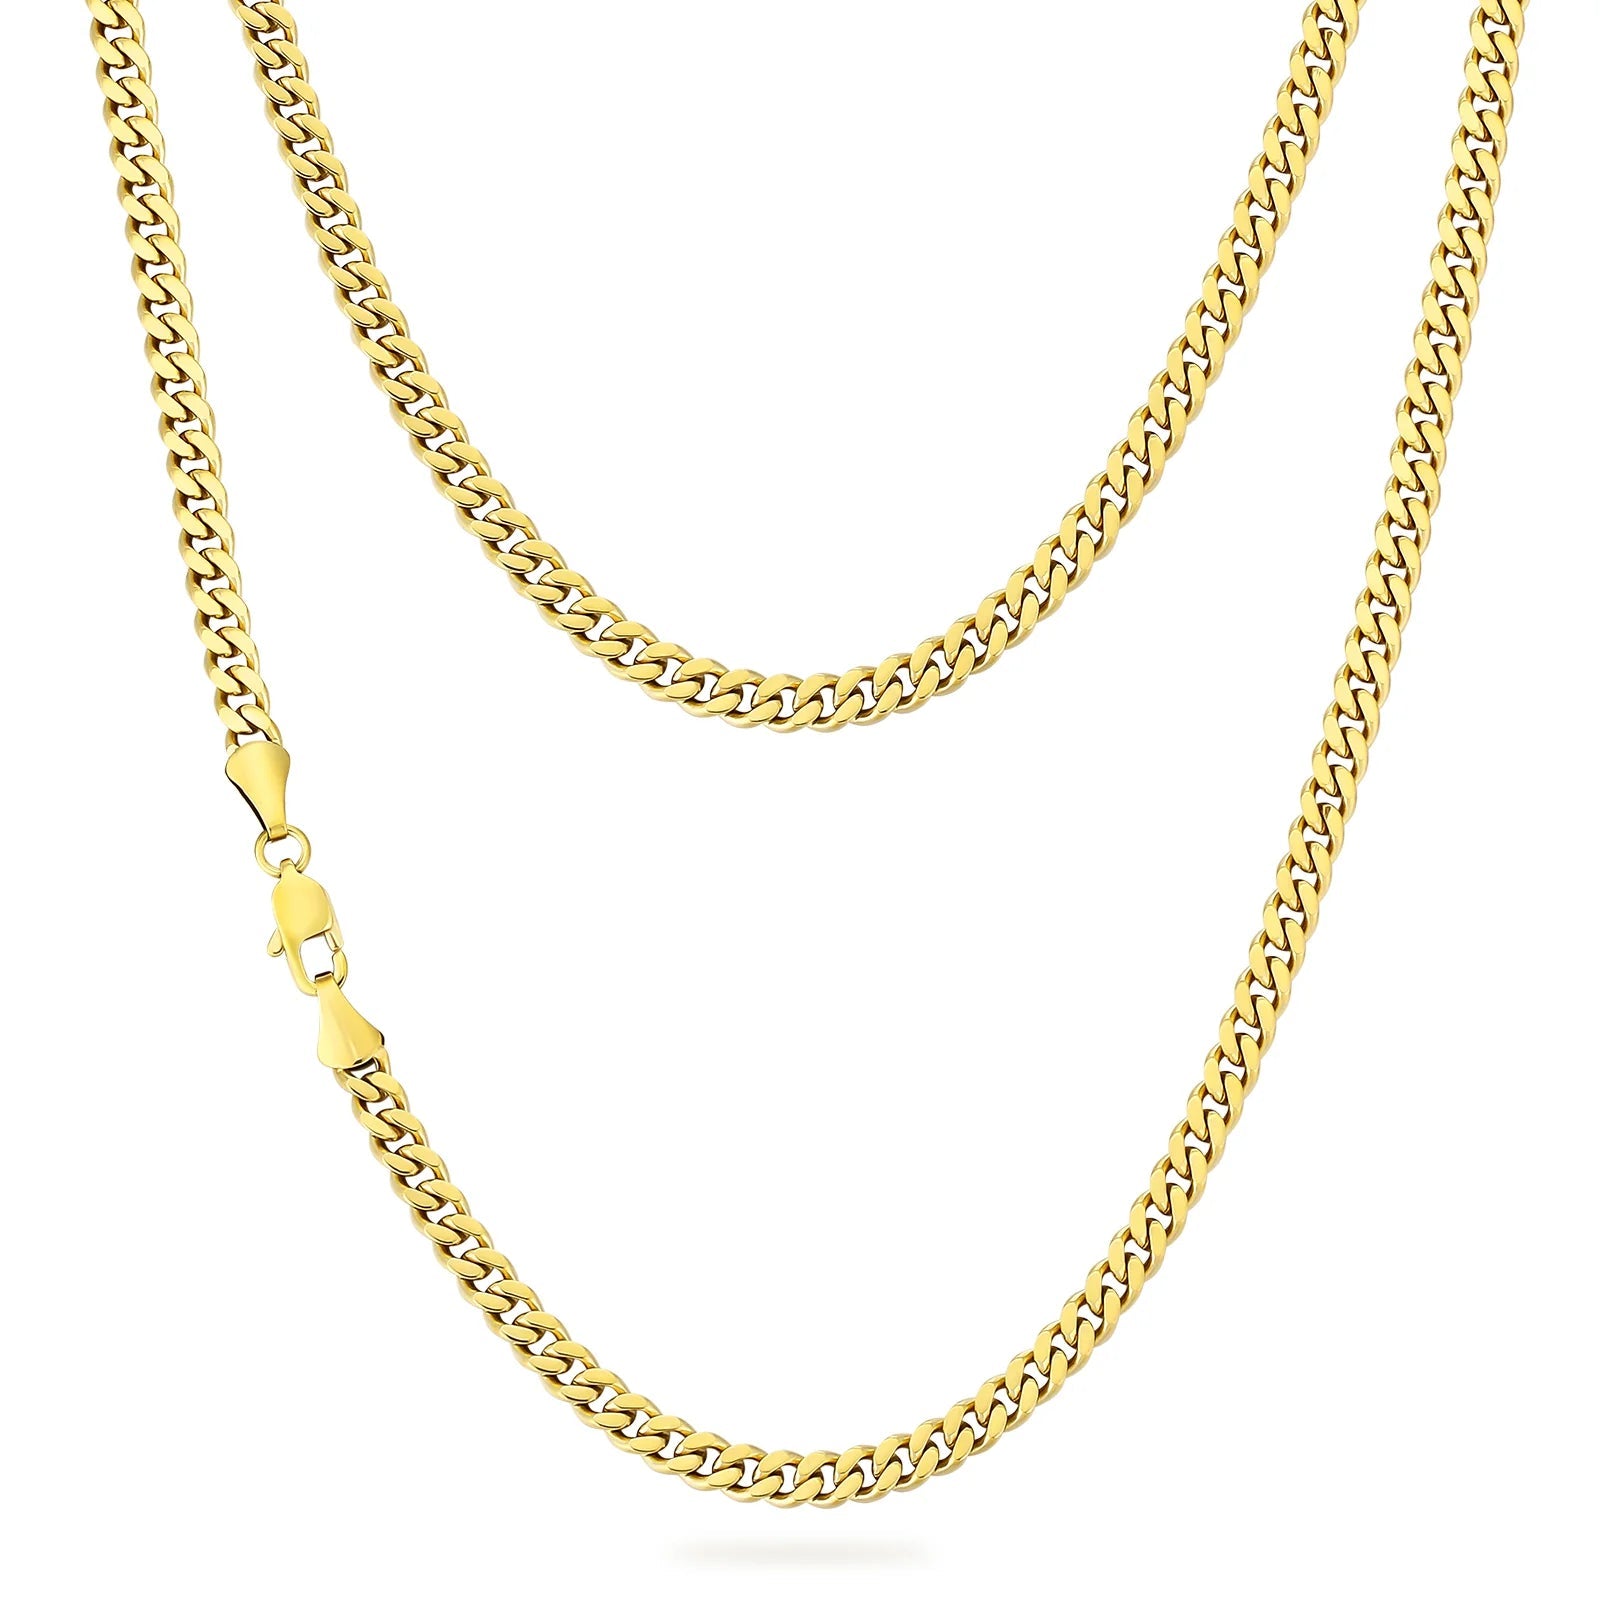 5mm Miami Cuban Link Chain in 14K Gold Necklaces 